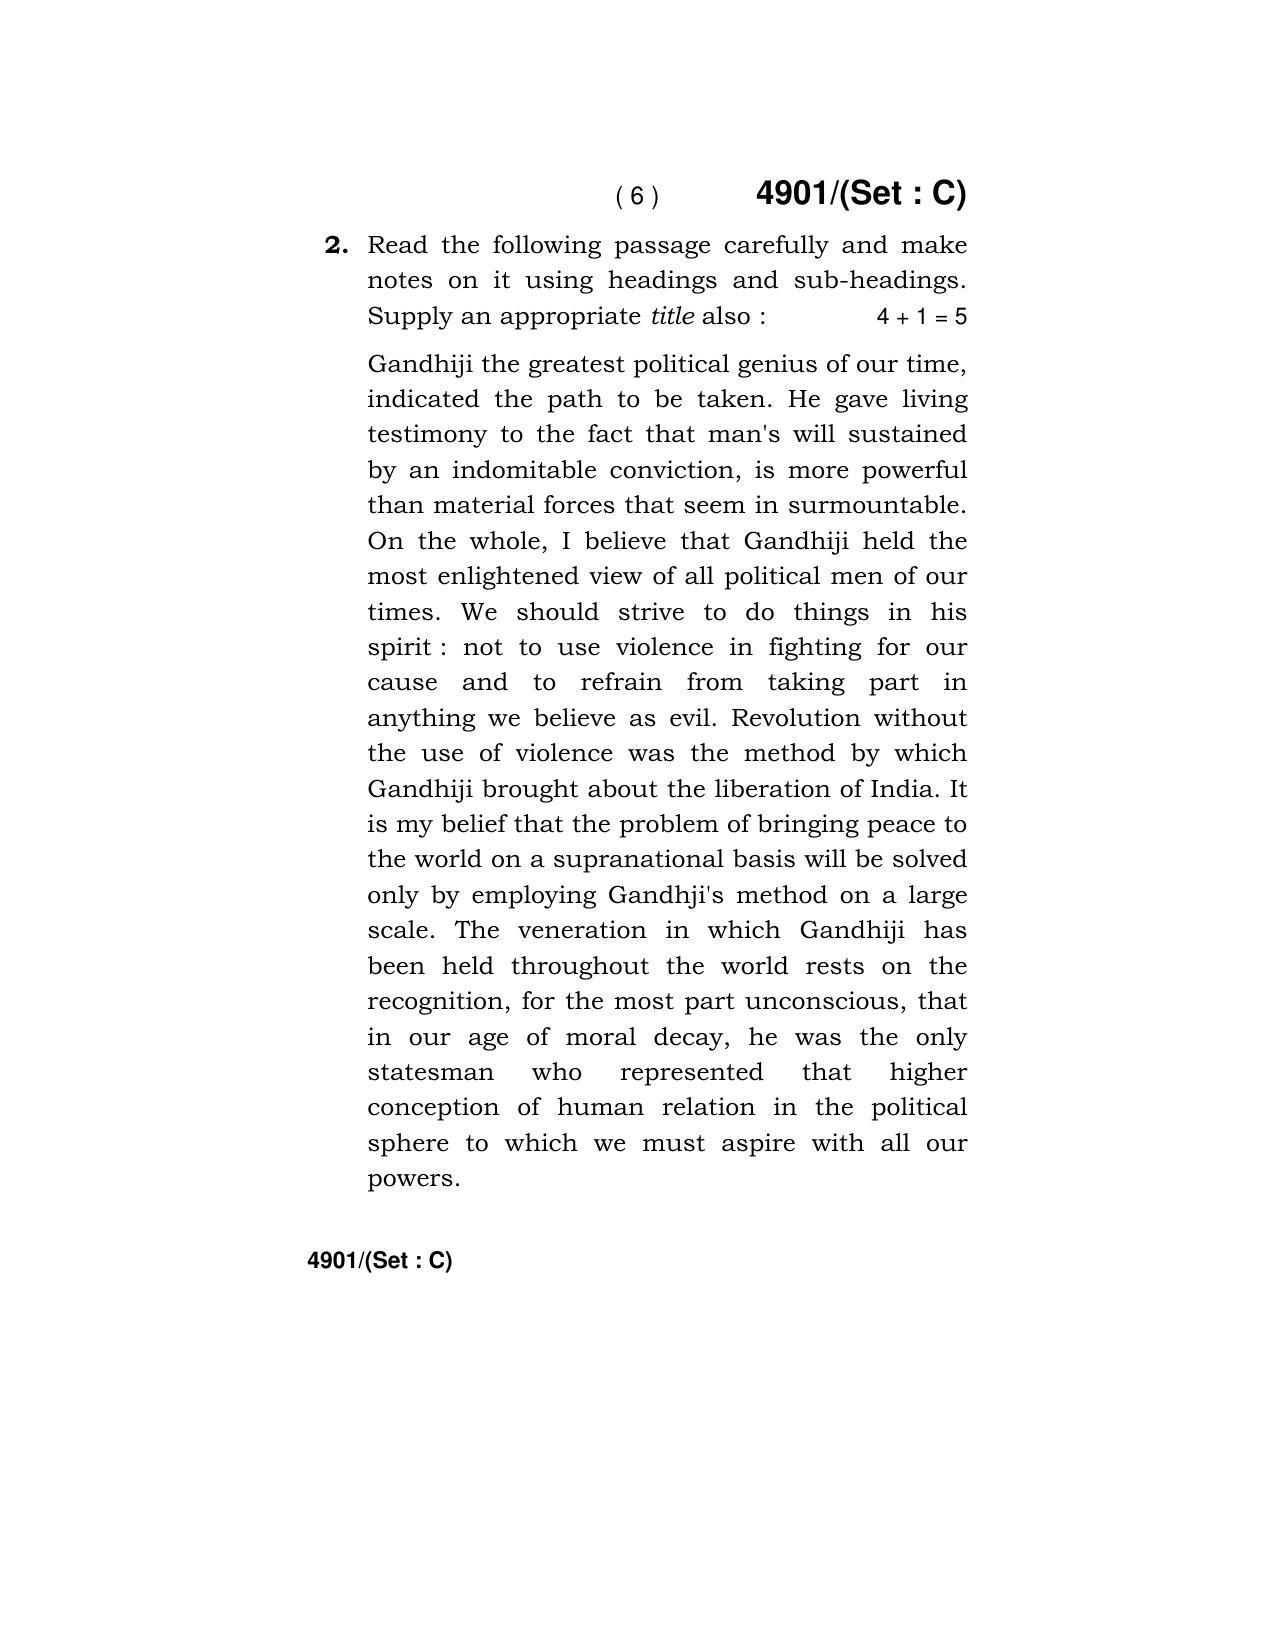 Haryana Board HBSE Class 12 English Core 2020 Question Paper - Page 38